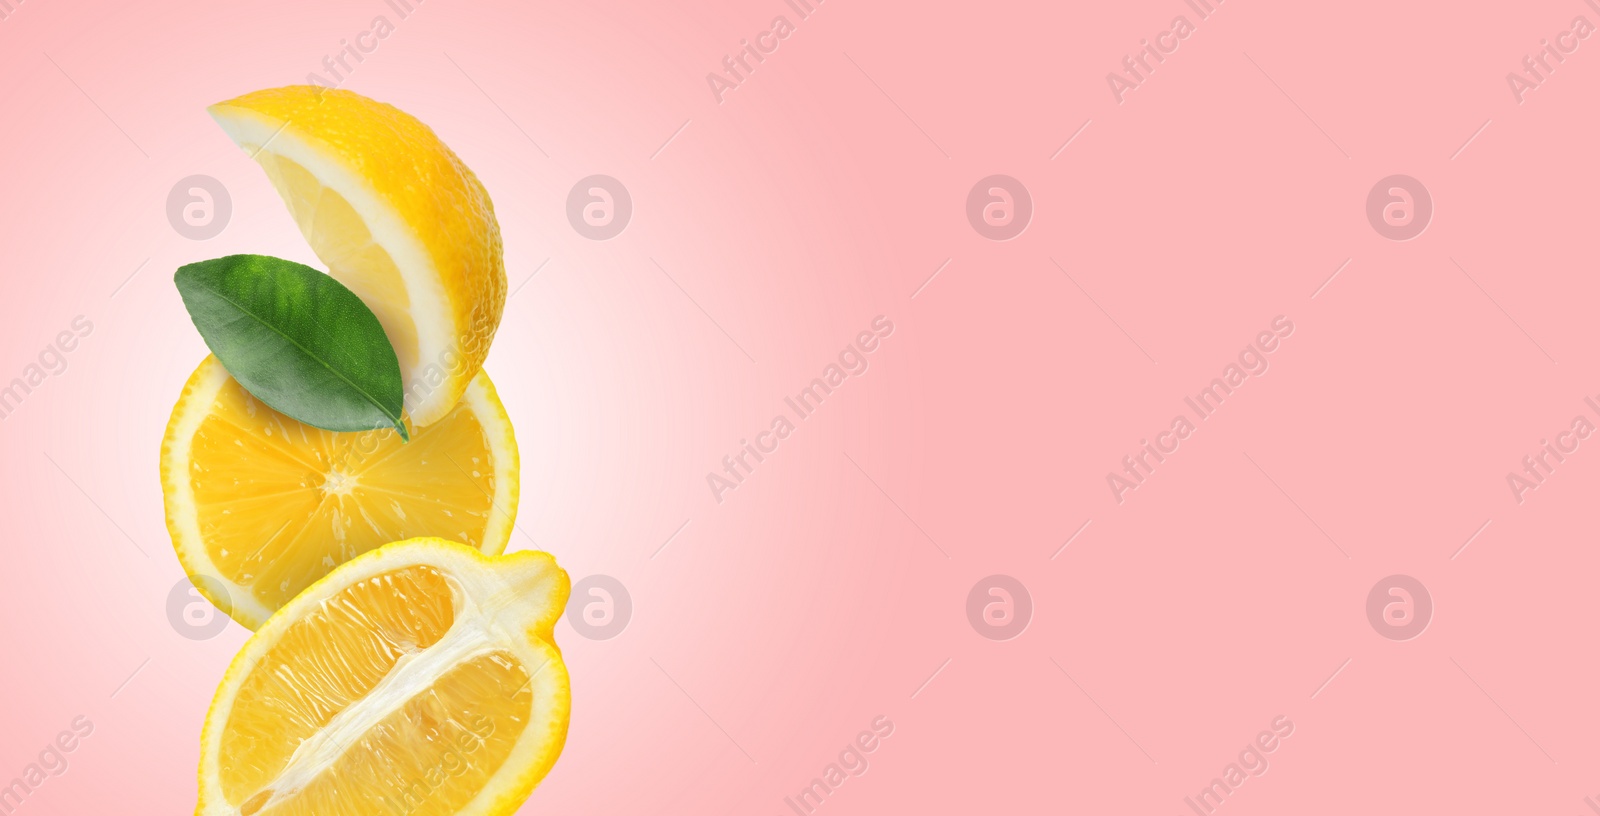 Image of Cut fresh lemons with green leaf on pastel pink background, space for text. Banner design